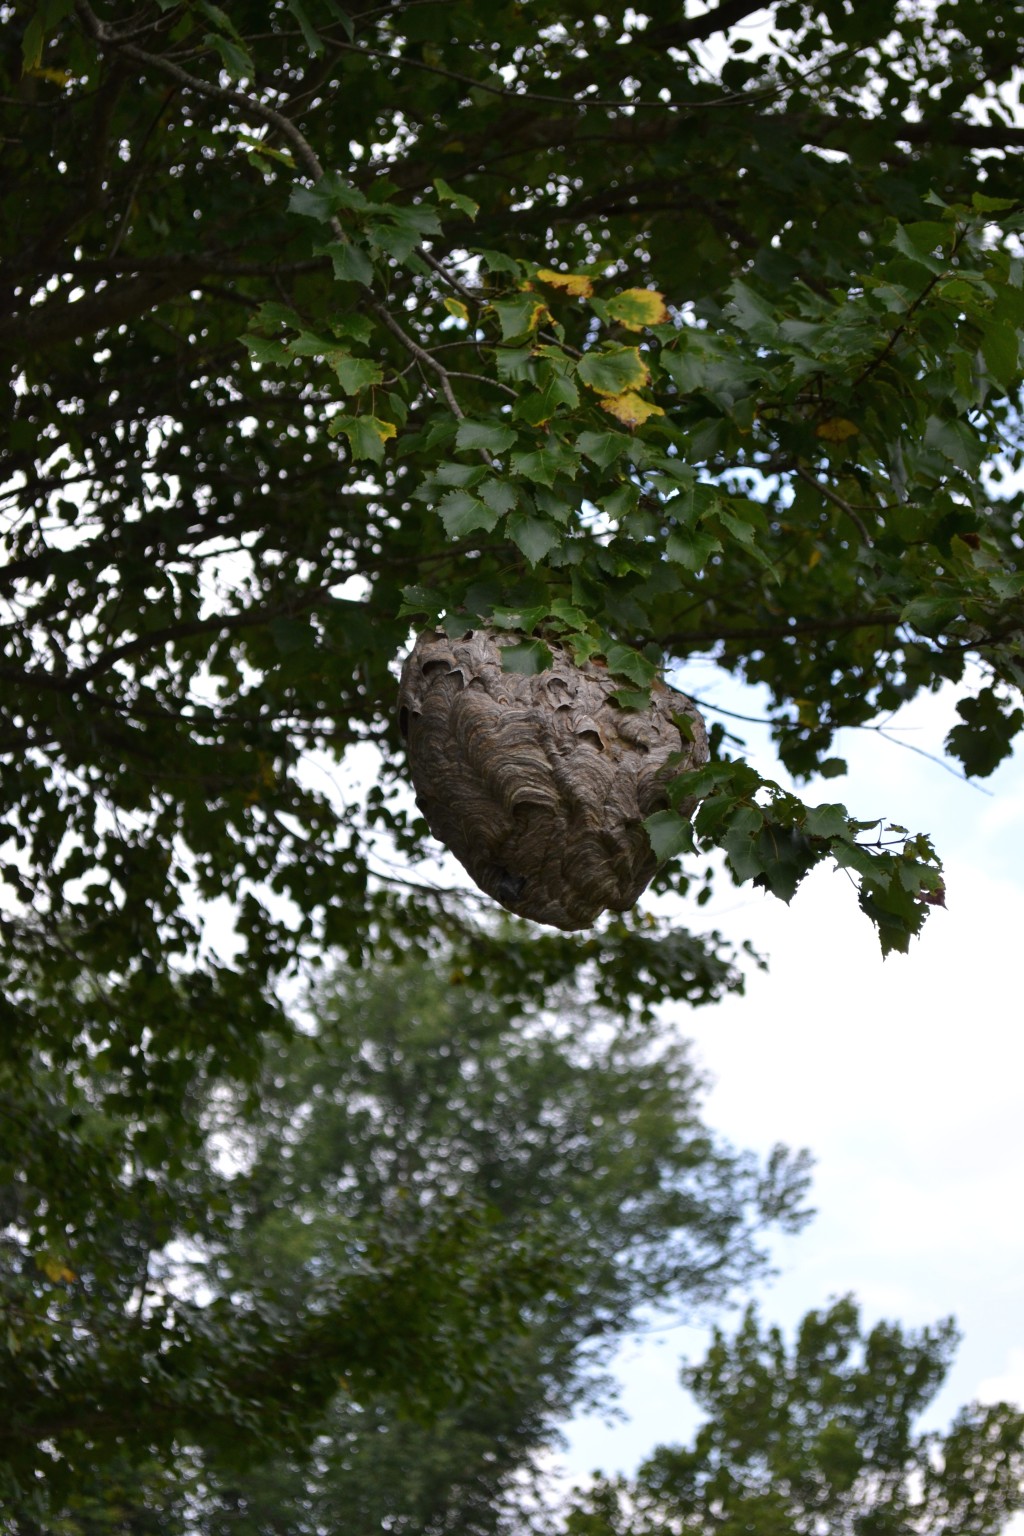 Couldn't resist capturing this enormous hornet's nest. Though I was afraid to get any closer, the beauty of it was irresistible.